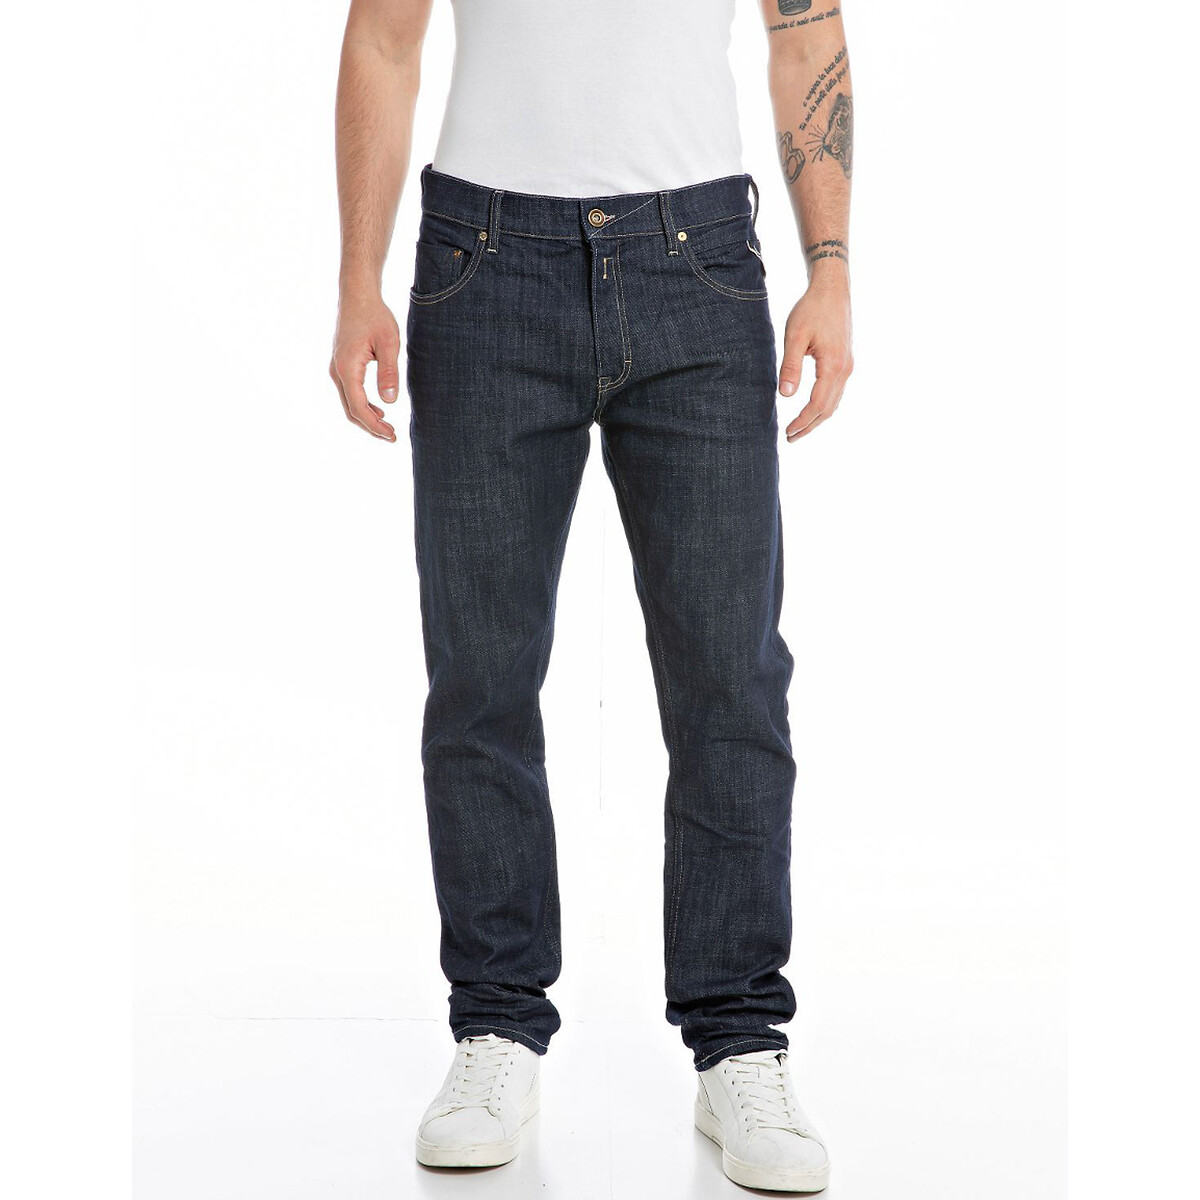 Image of Mickym Tapered Jeans in Slim Fit and Mid Rise